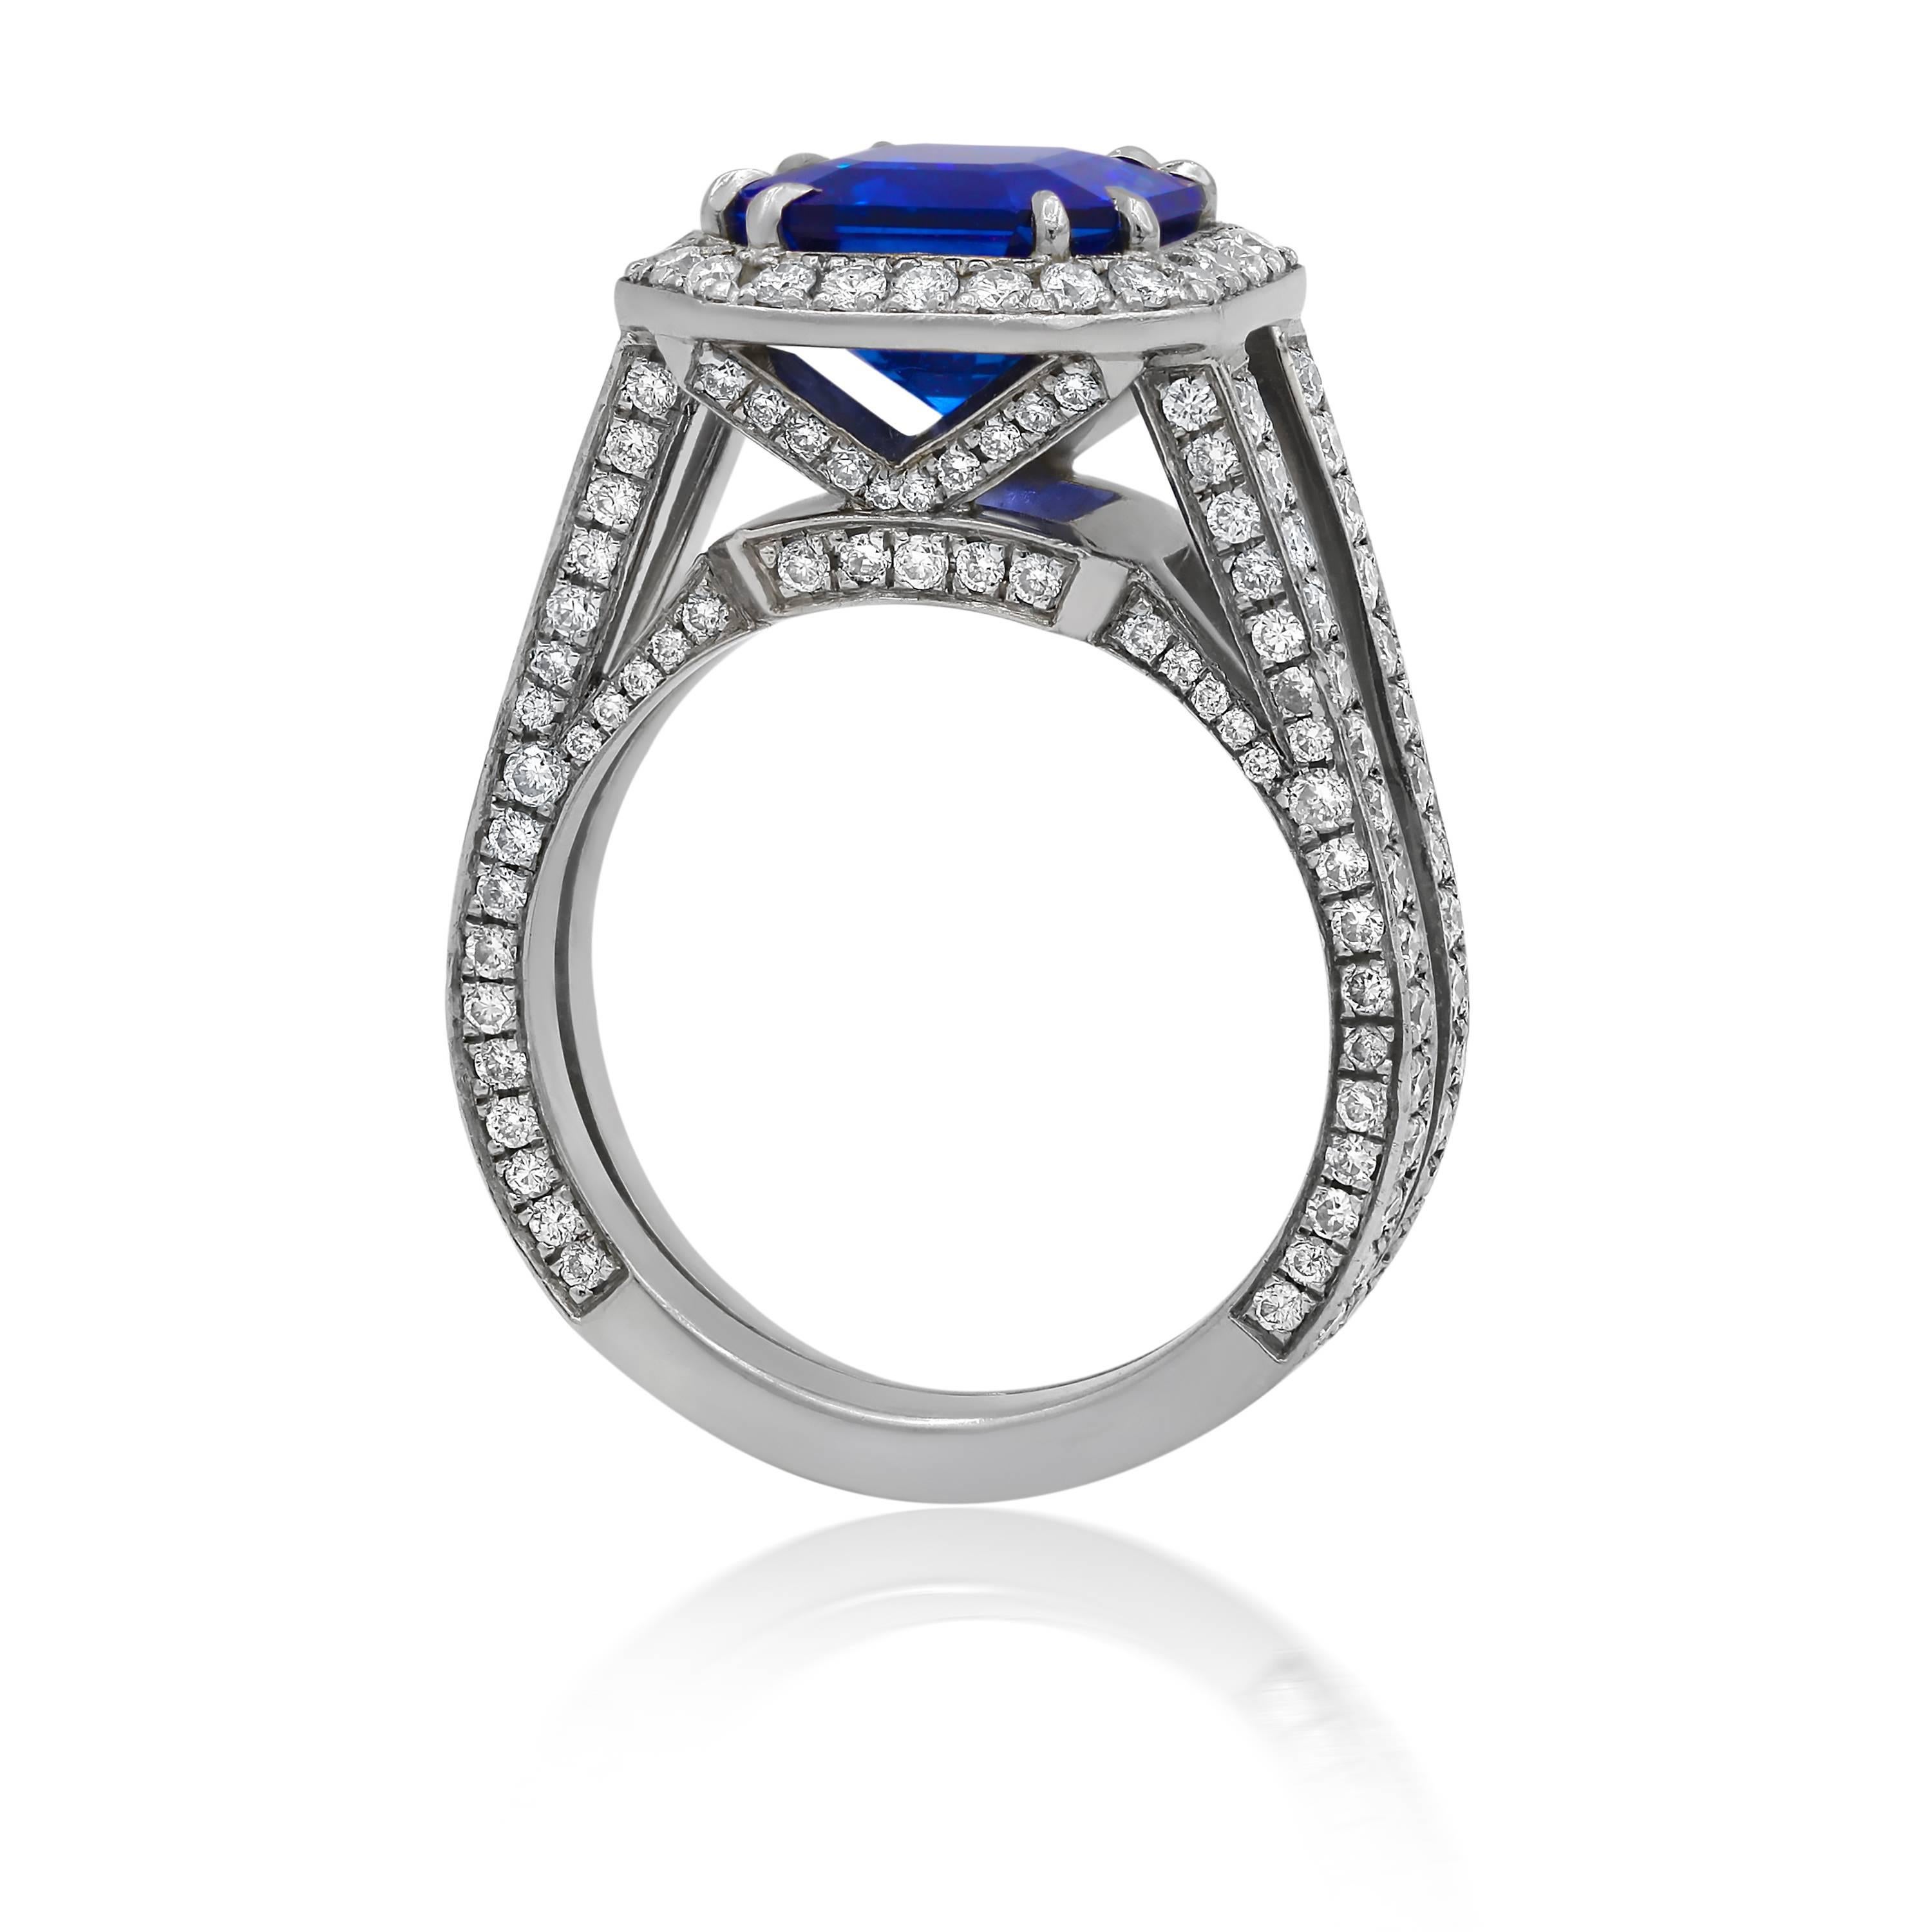 18k white gold sapphire ring features 3.98 carat total weight of emerald cut sapphire as a center stone and 1.20 ct total weight of diamonds